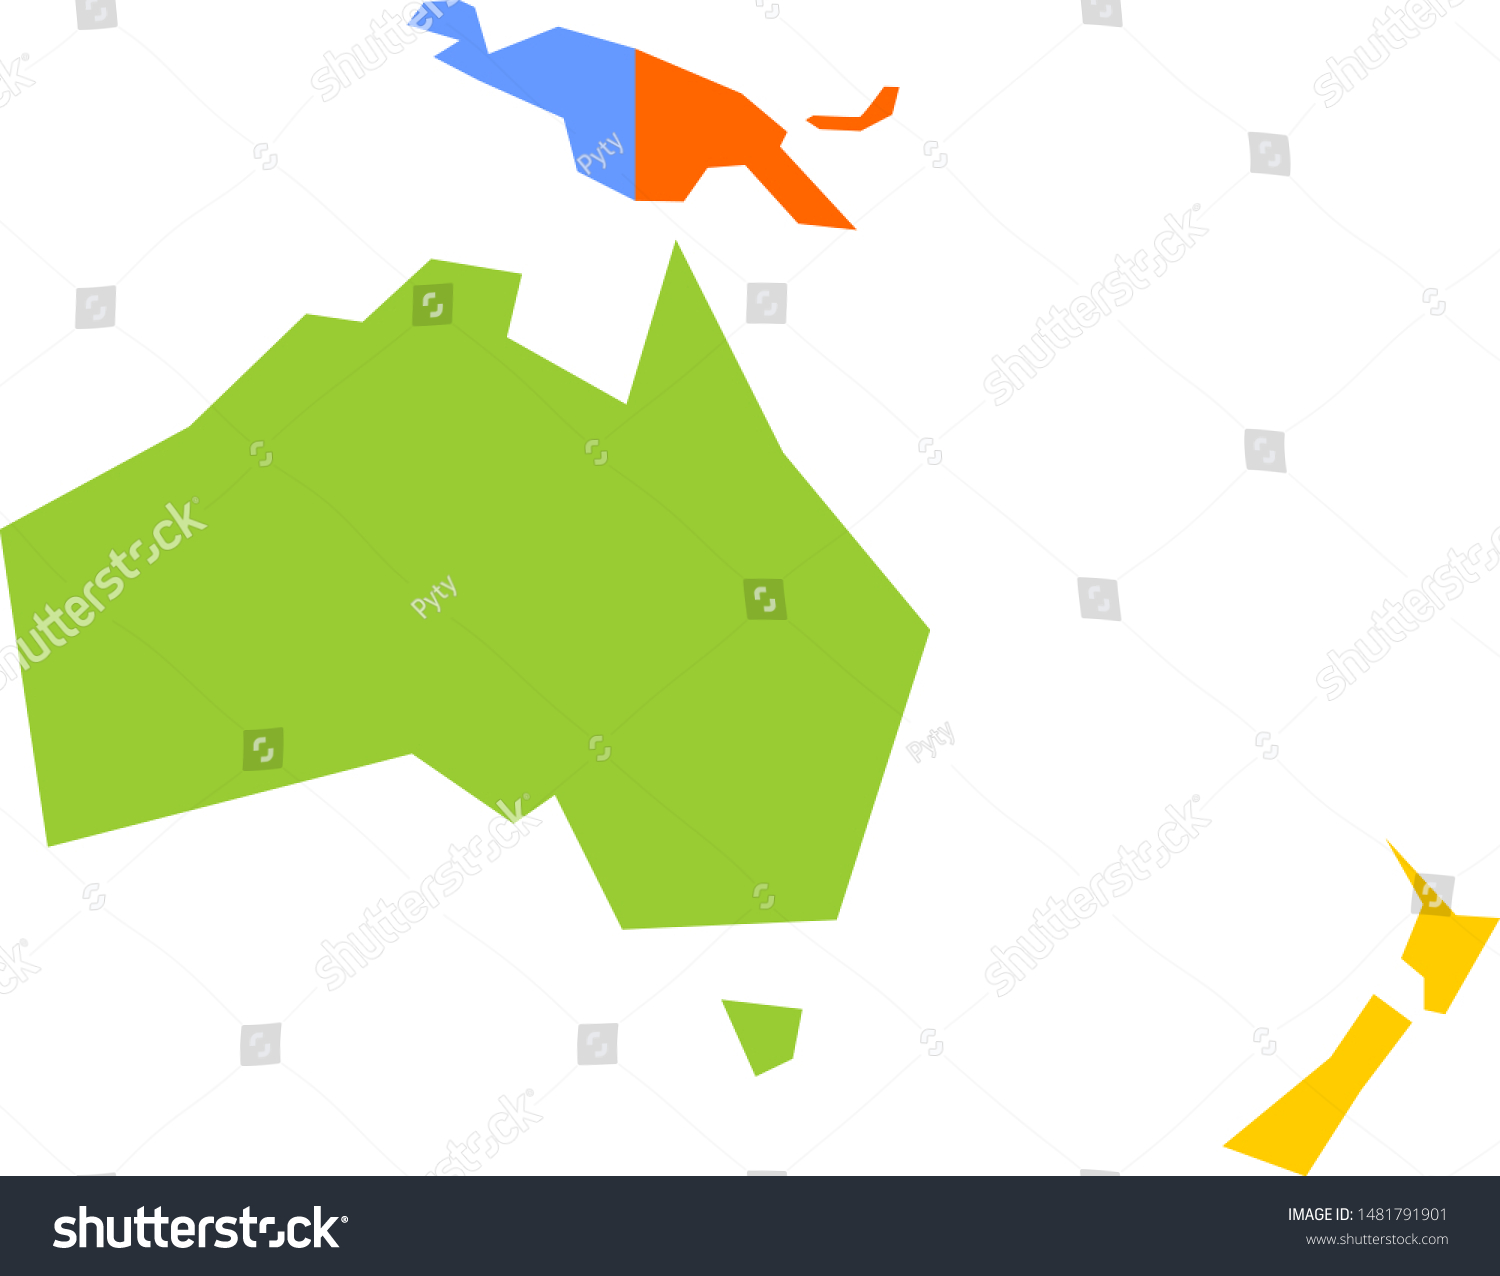 Very Simplified Infographical Political Map Australia 112890 Hot Sex Picture 7880